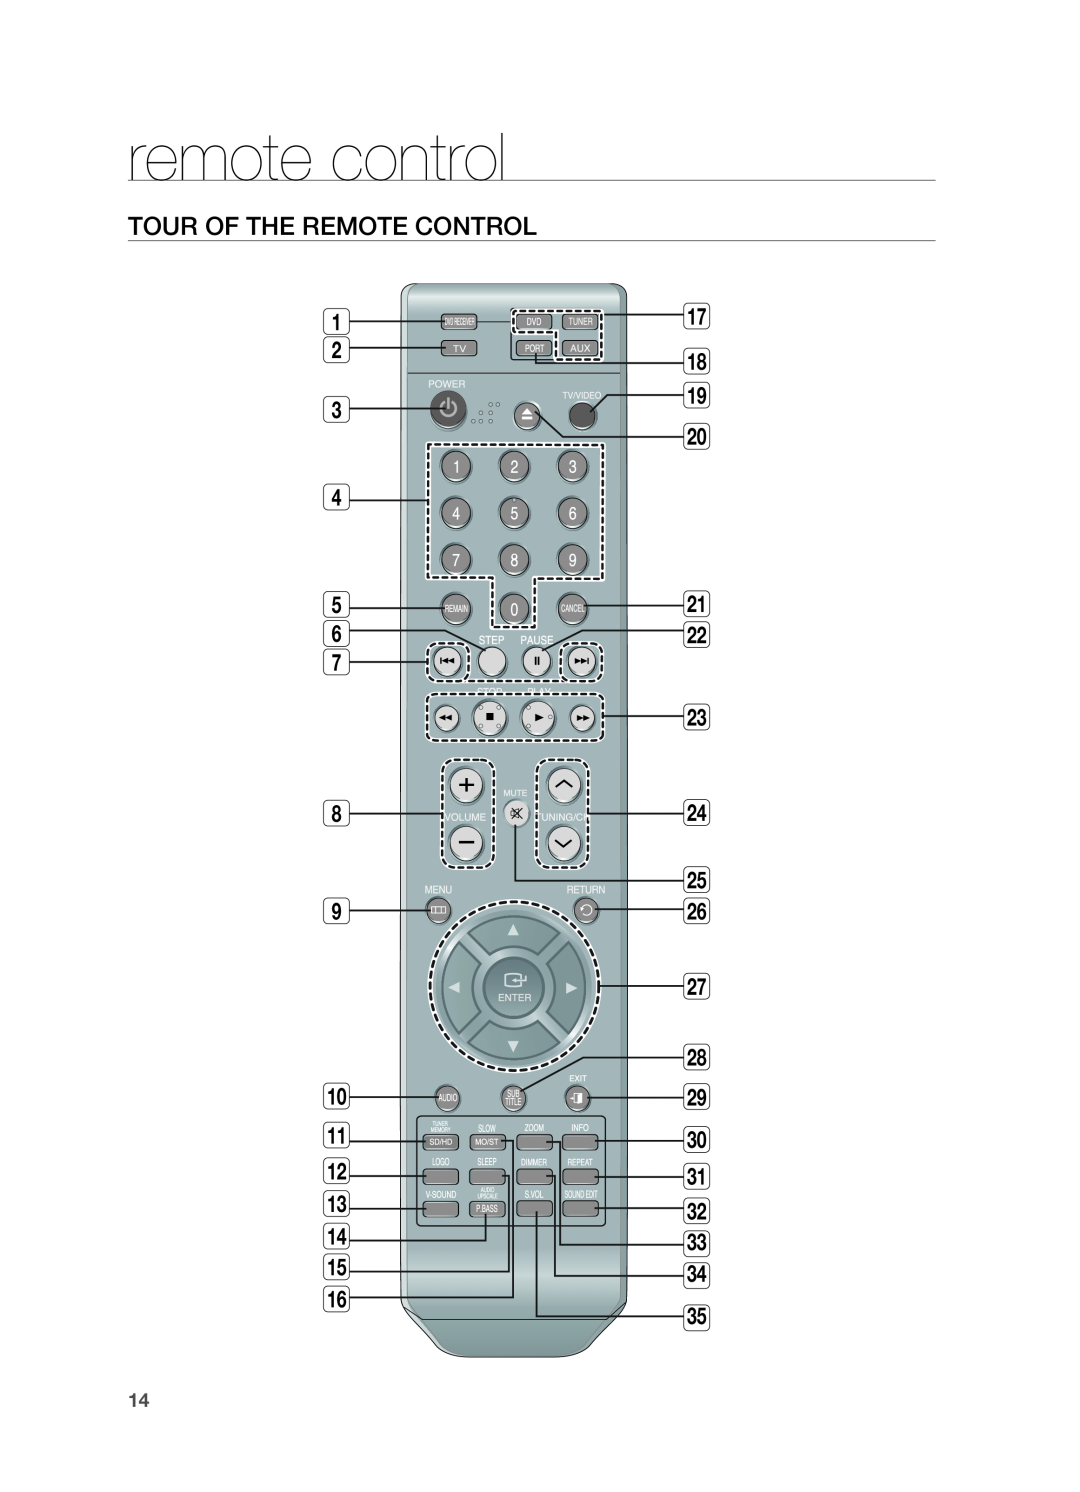 Samsung HT-X810 user manual Tour of the Remote Control, remote control 